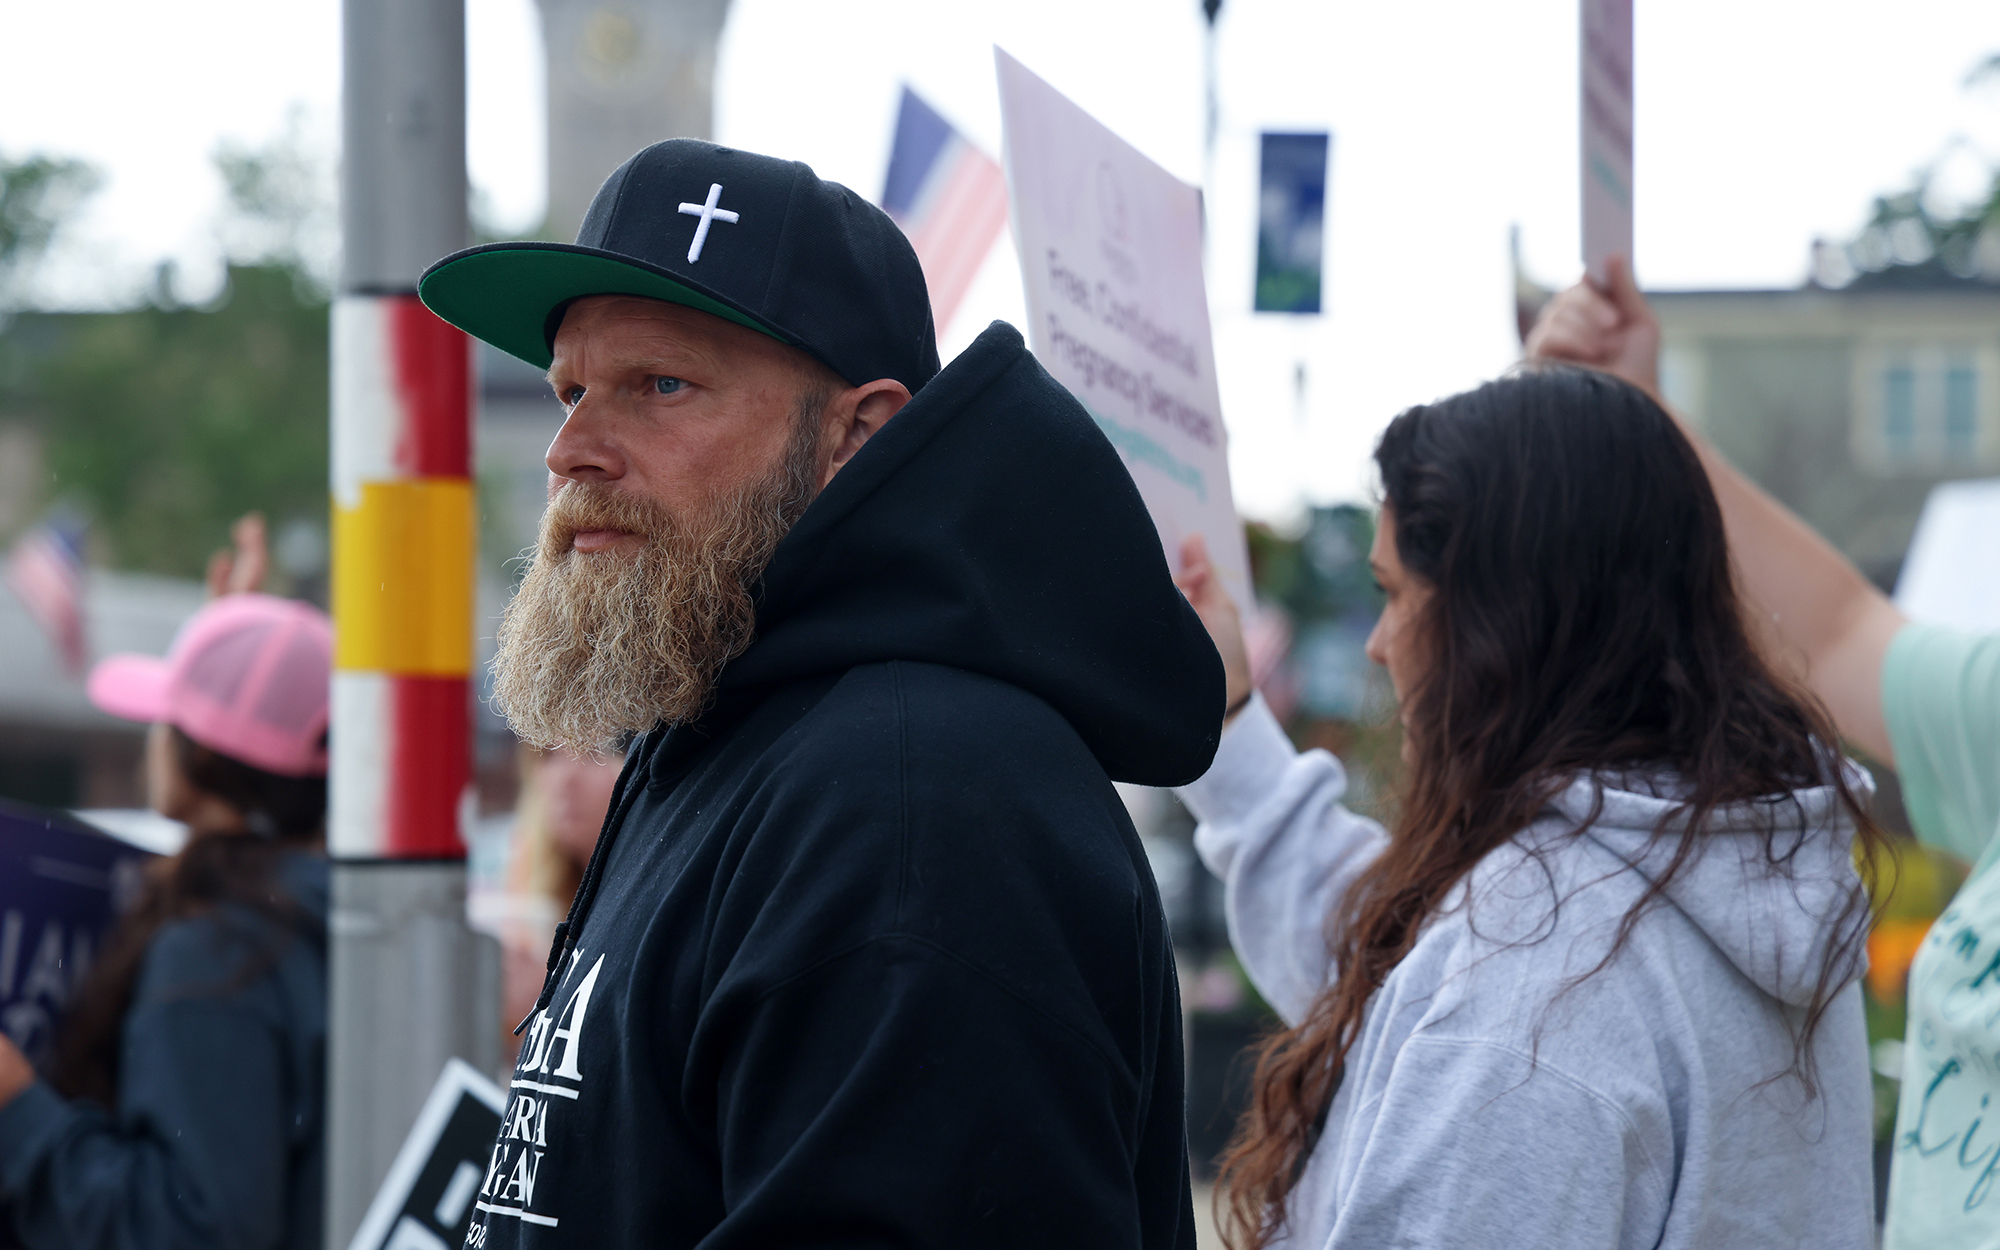 Shaun O'Reilly joins anti-abortion advocates outside First Concern Pregnancy Resource Center during an open house, on June 17, 2023, in Marlborough, Massachusetts. (Trilce Estrada Olvera/News21)